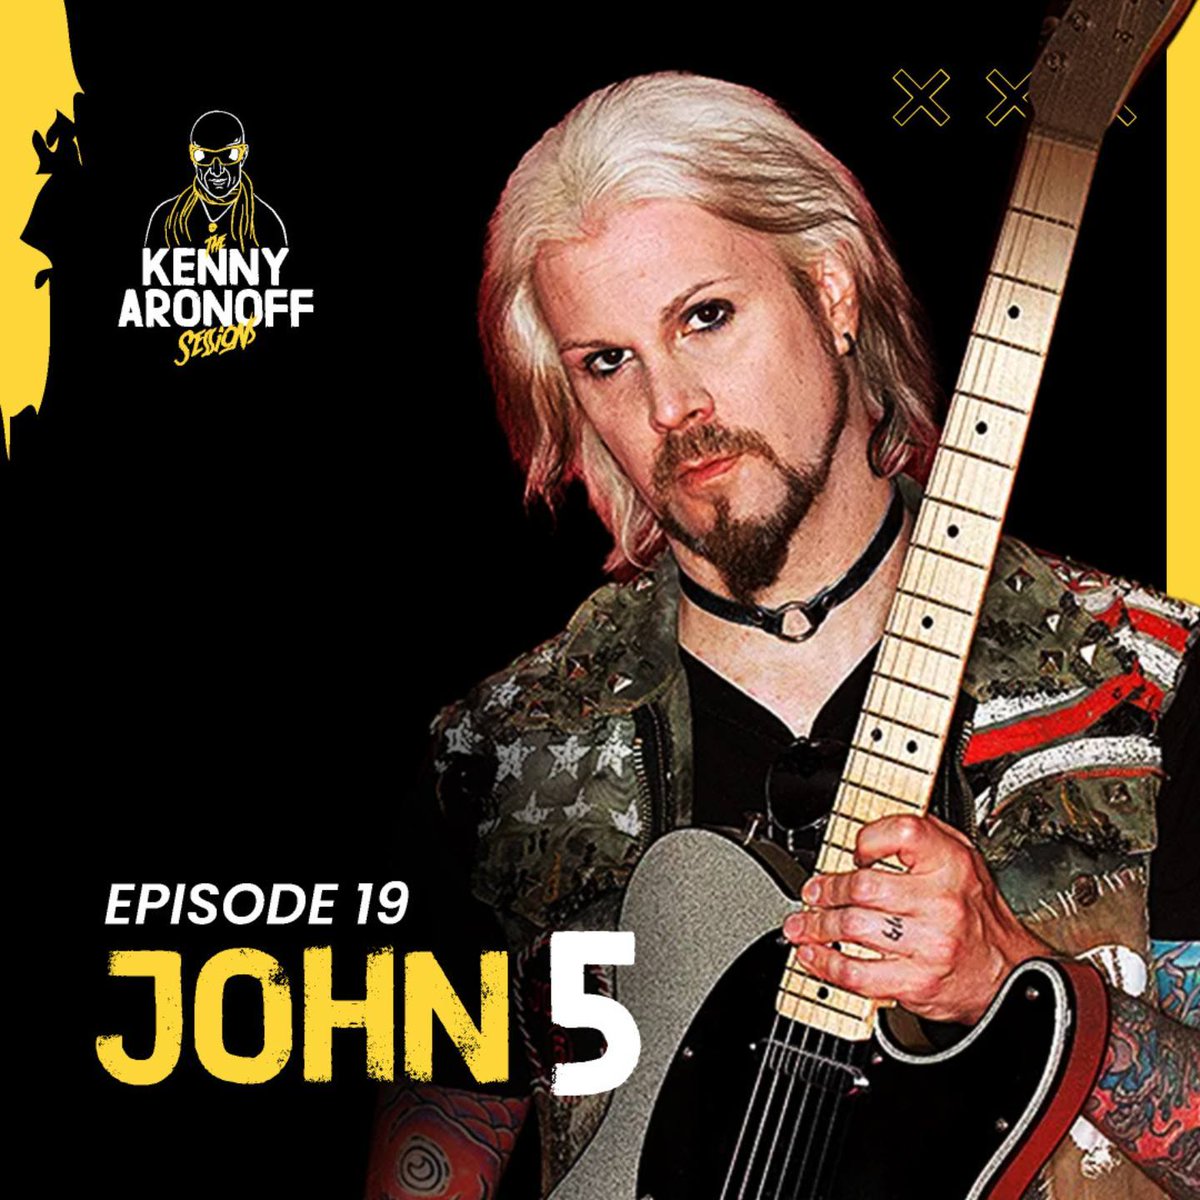 Had a great time joining @AronoffOFFICIAL on what is one of my FAVORITE new podcasts!! 
👉Follow this link to view the interview in full: tr.ee/mWPztK9r68 
#John5 #KennyAronoff #TheKennyAronoffSessions